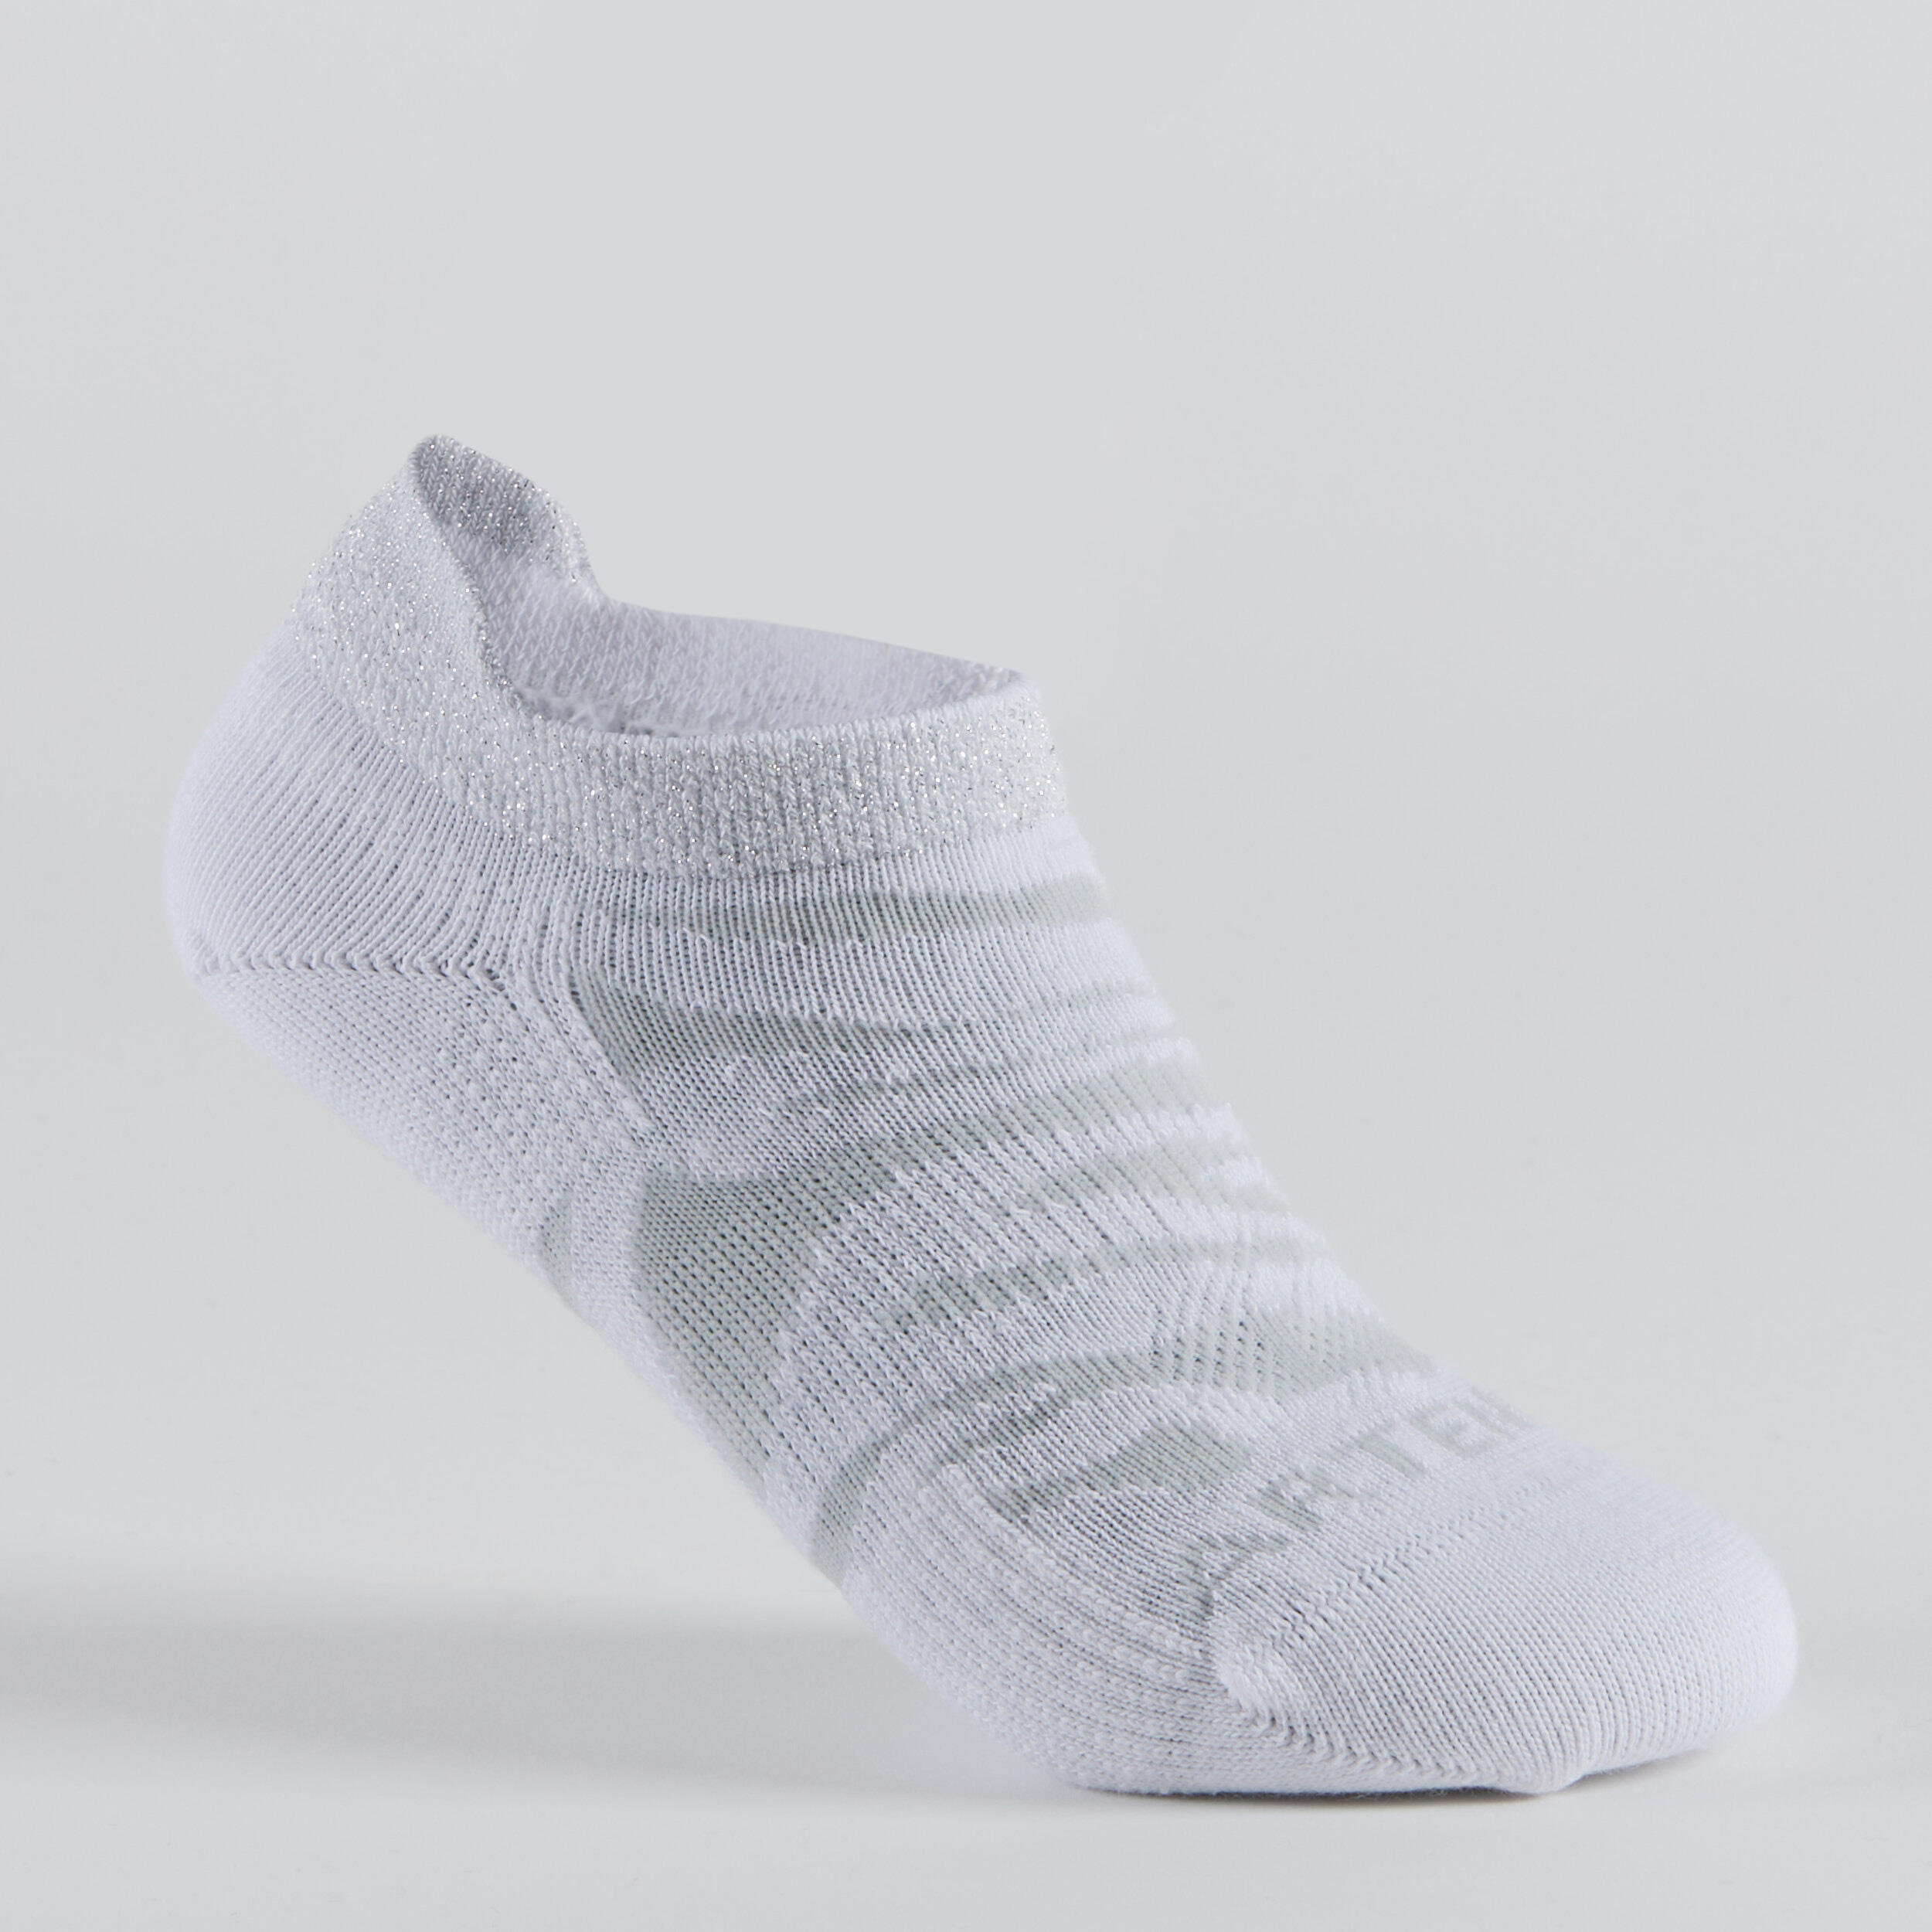 Kids' Low Tennis Socks Tri-Pack RS 160 - White with Patterns 3/14